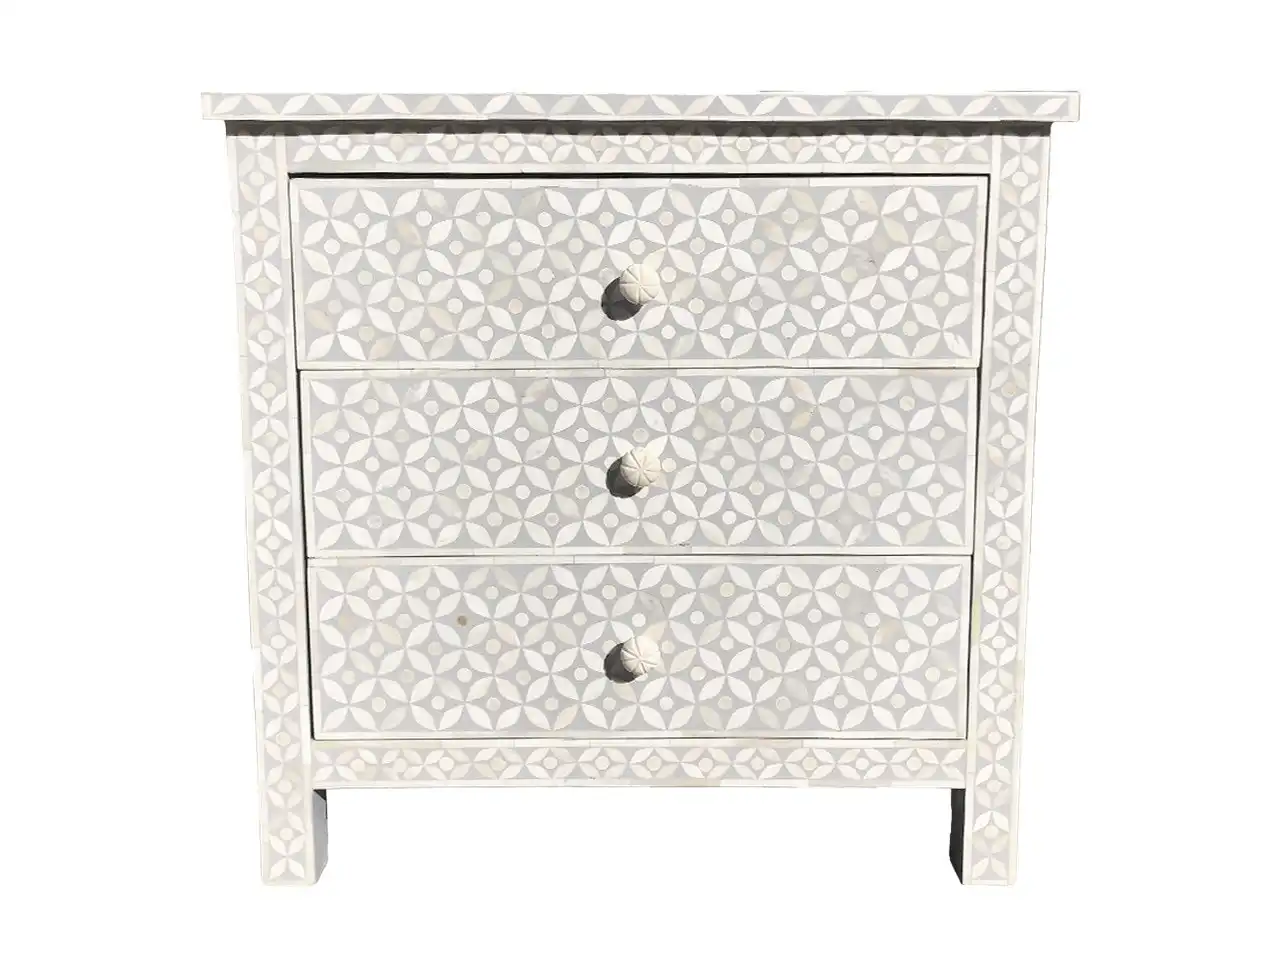 Zohi Interiors Bone Inlay Wide 3 Drawer Bedside Chest in Celtic Grey